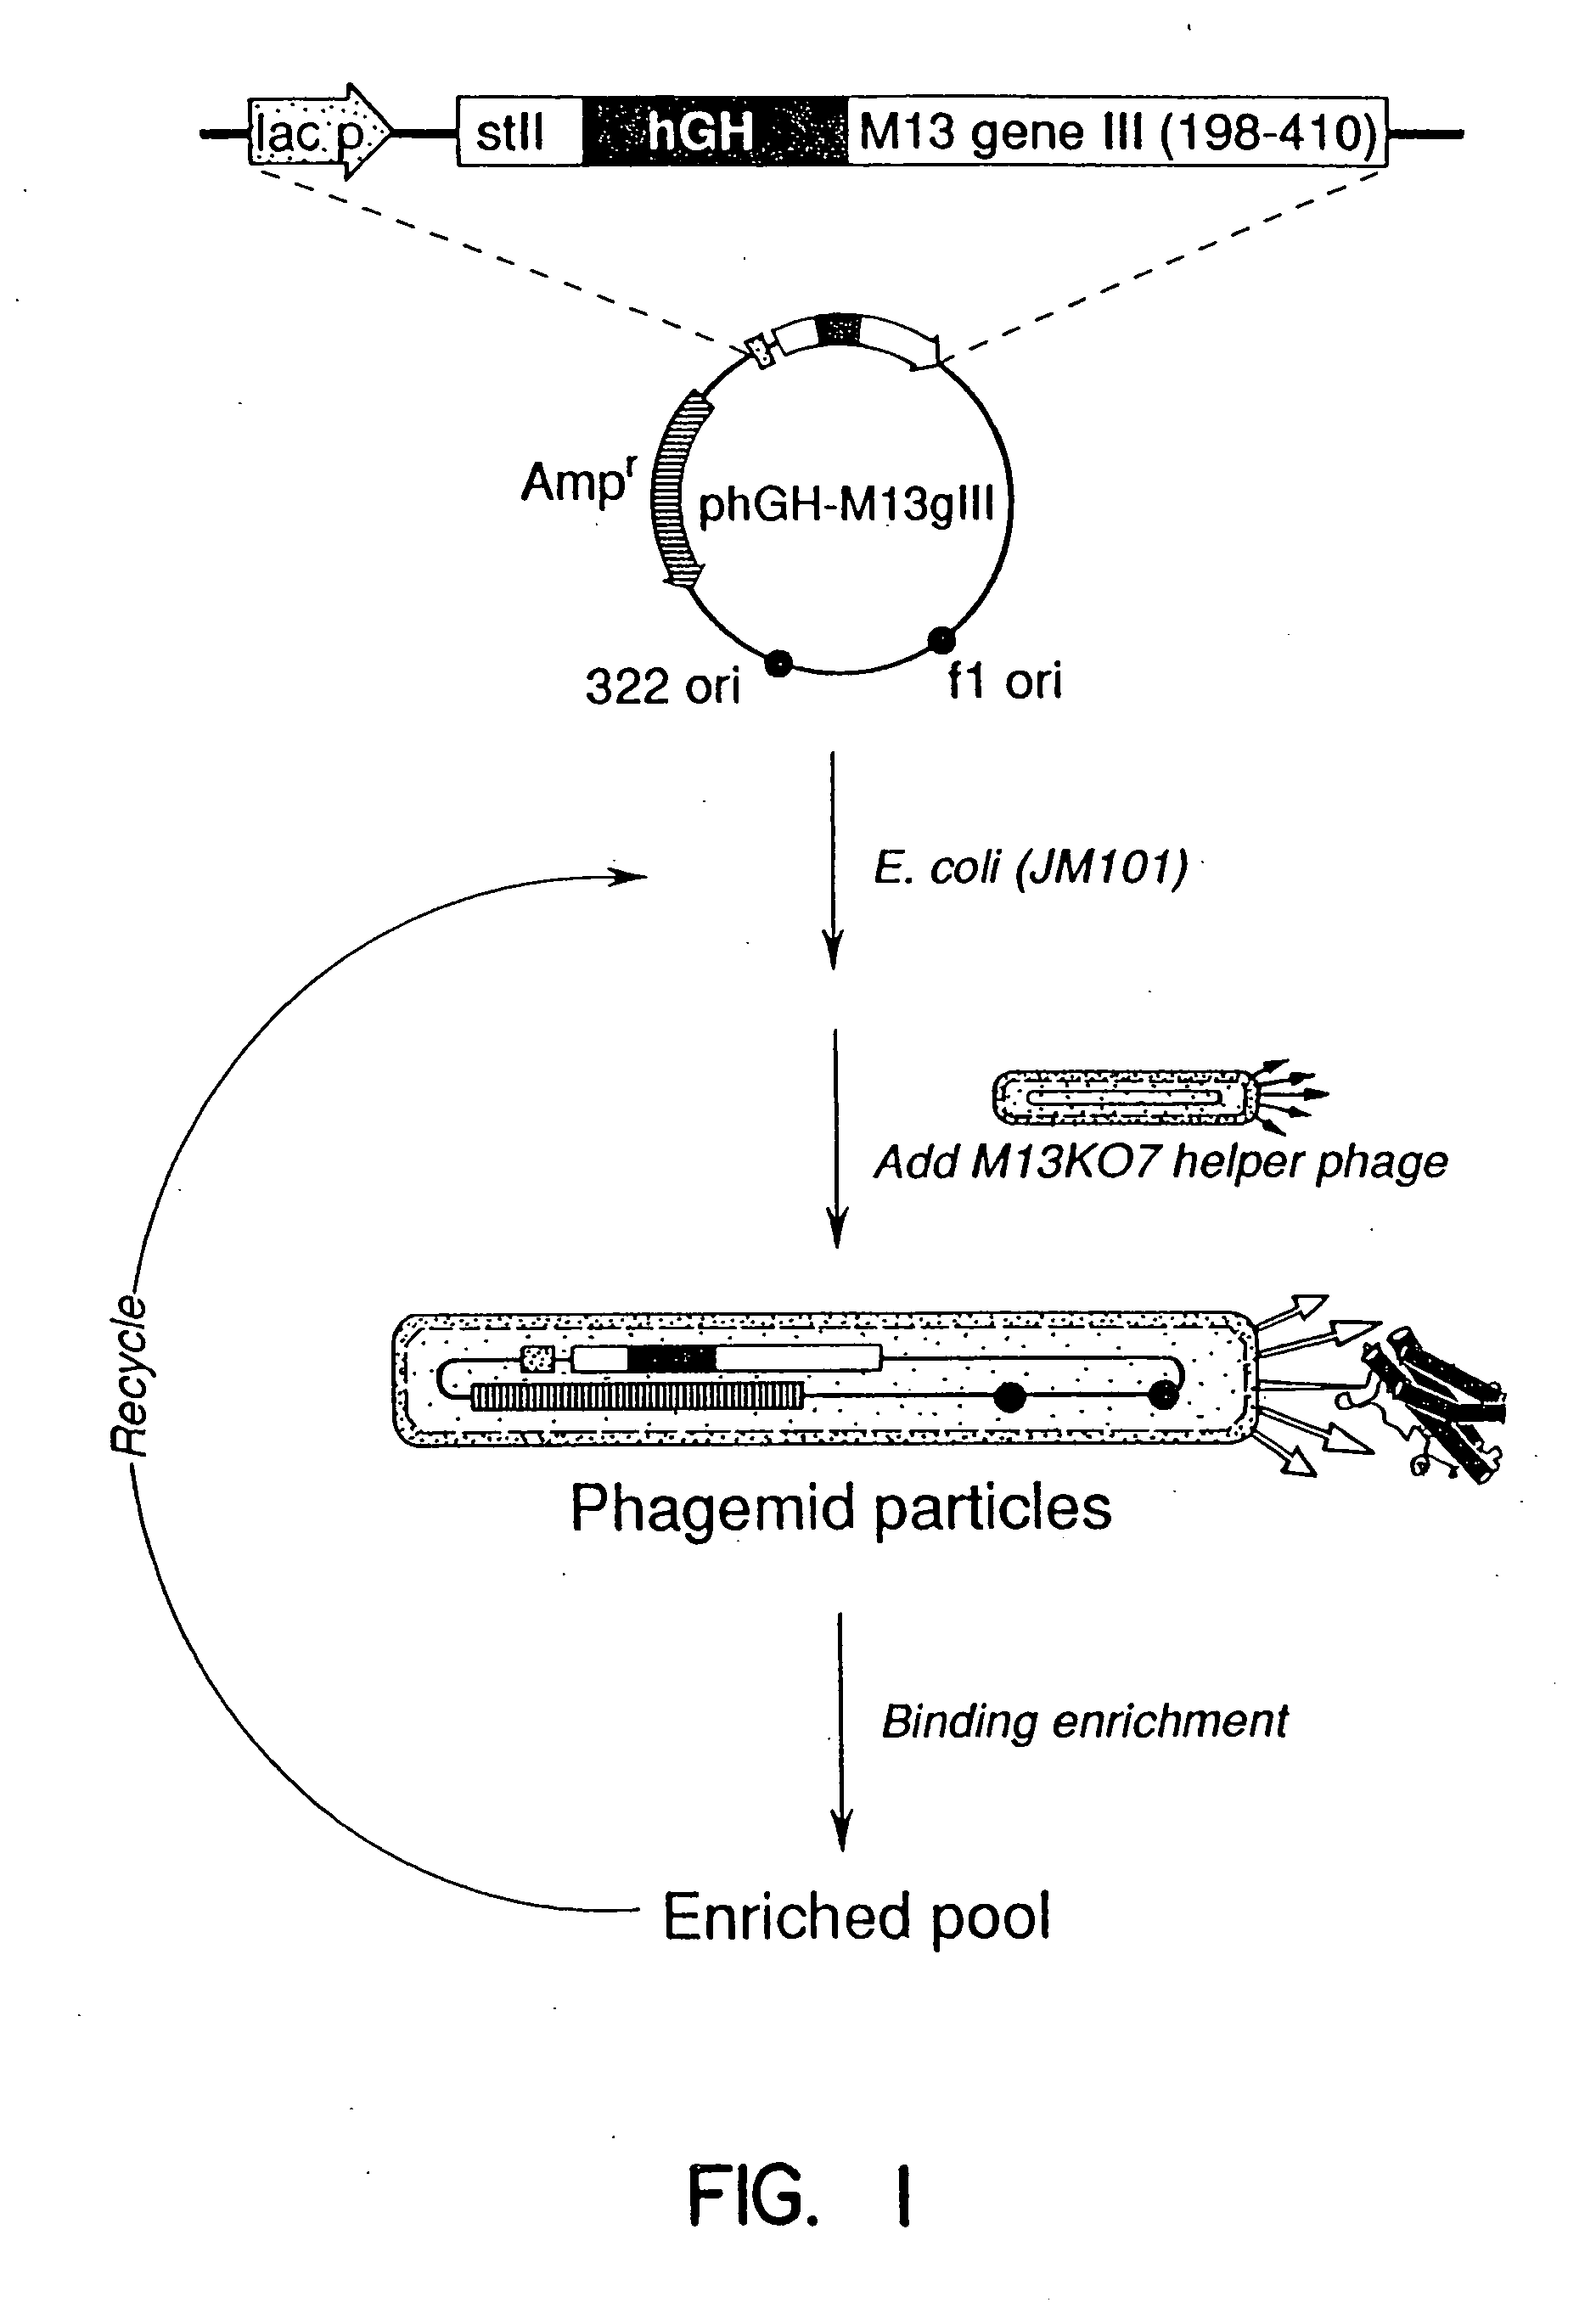 Enrichment method for variant proteins with altered binding properties